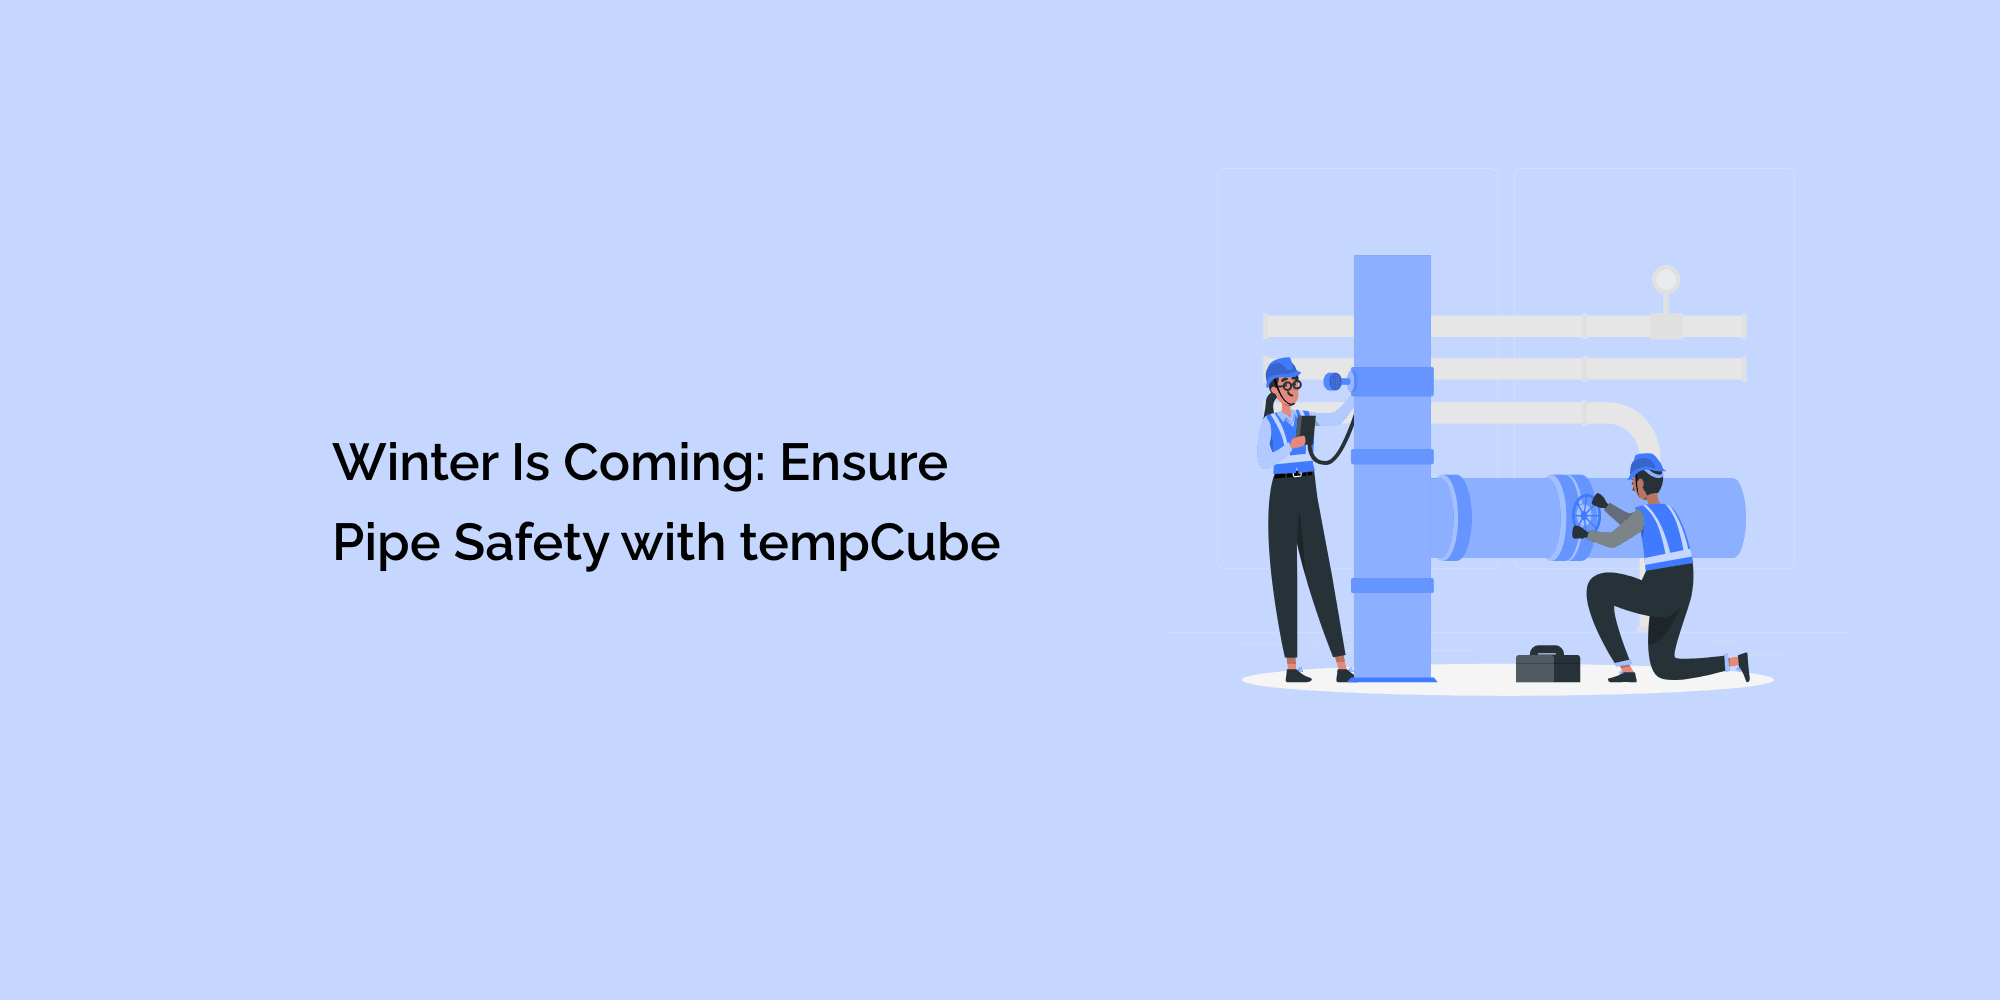 Winter Is Coming: Ensure Pipe Safety with tempCube